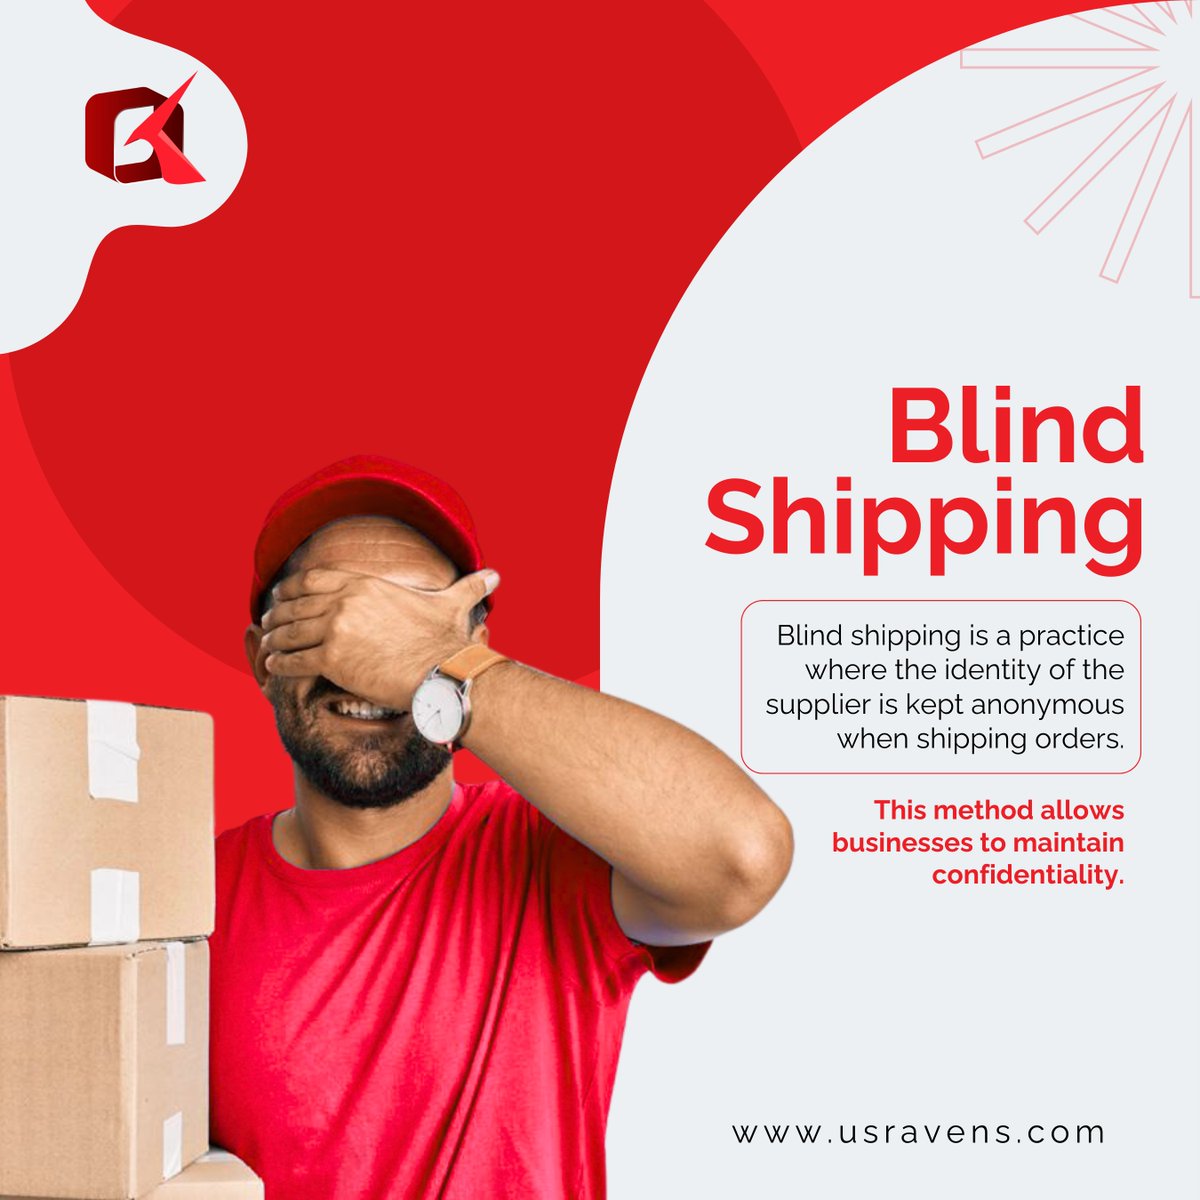 Blind shipping is a practice where the identity of the supplier is kept anonymous when shipping orders. 
 Follow us on  @USRavens1 ✨  

#USRavens #blindshipment #shipments #Blindshipping #logisticsservices #serviceprovider #logisticscompany #UnitedStates #Delaware #shippers